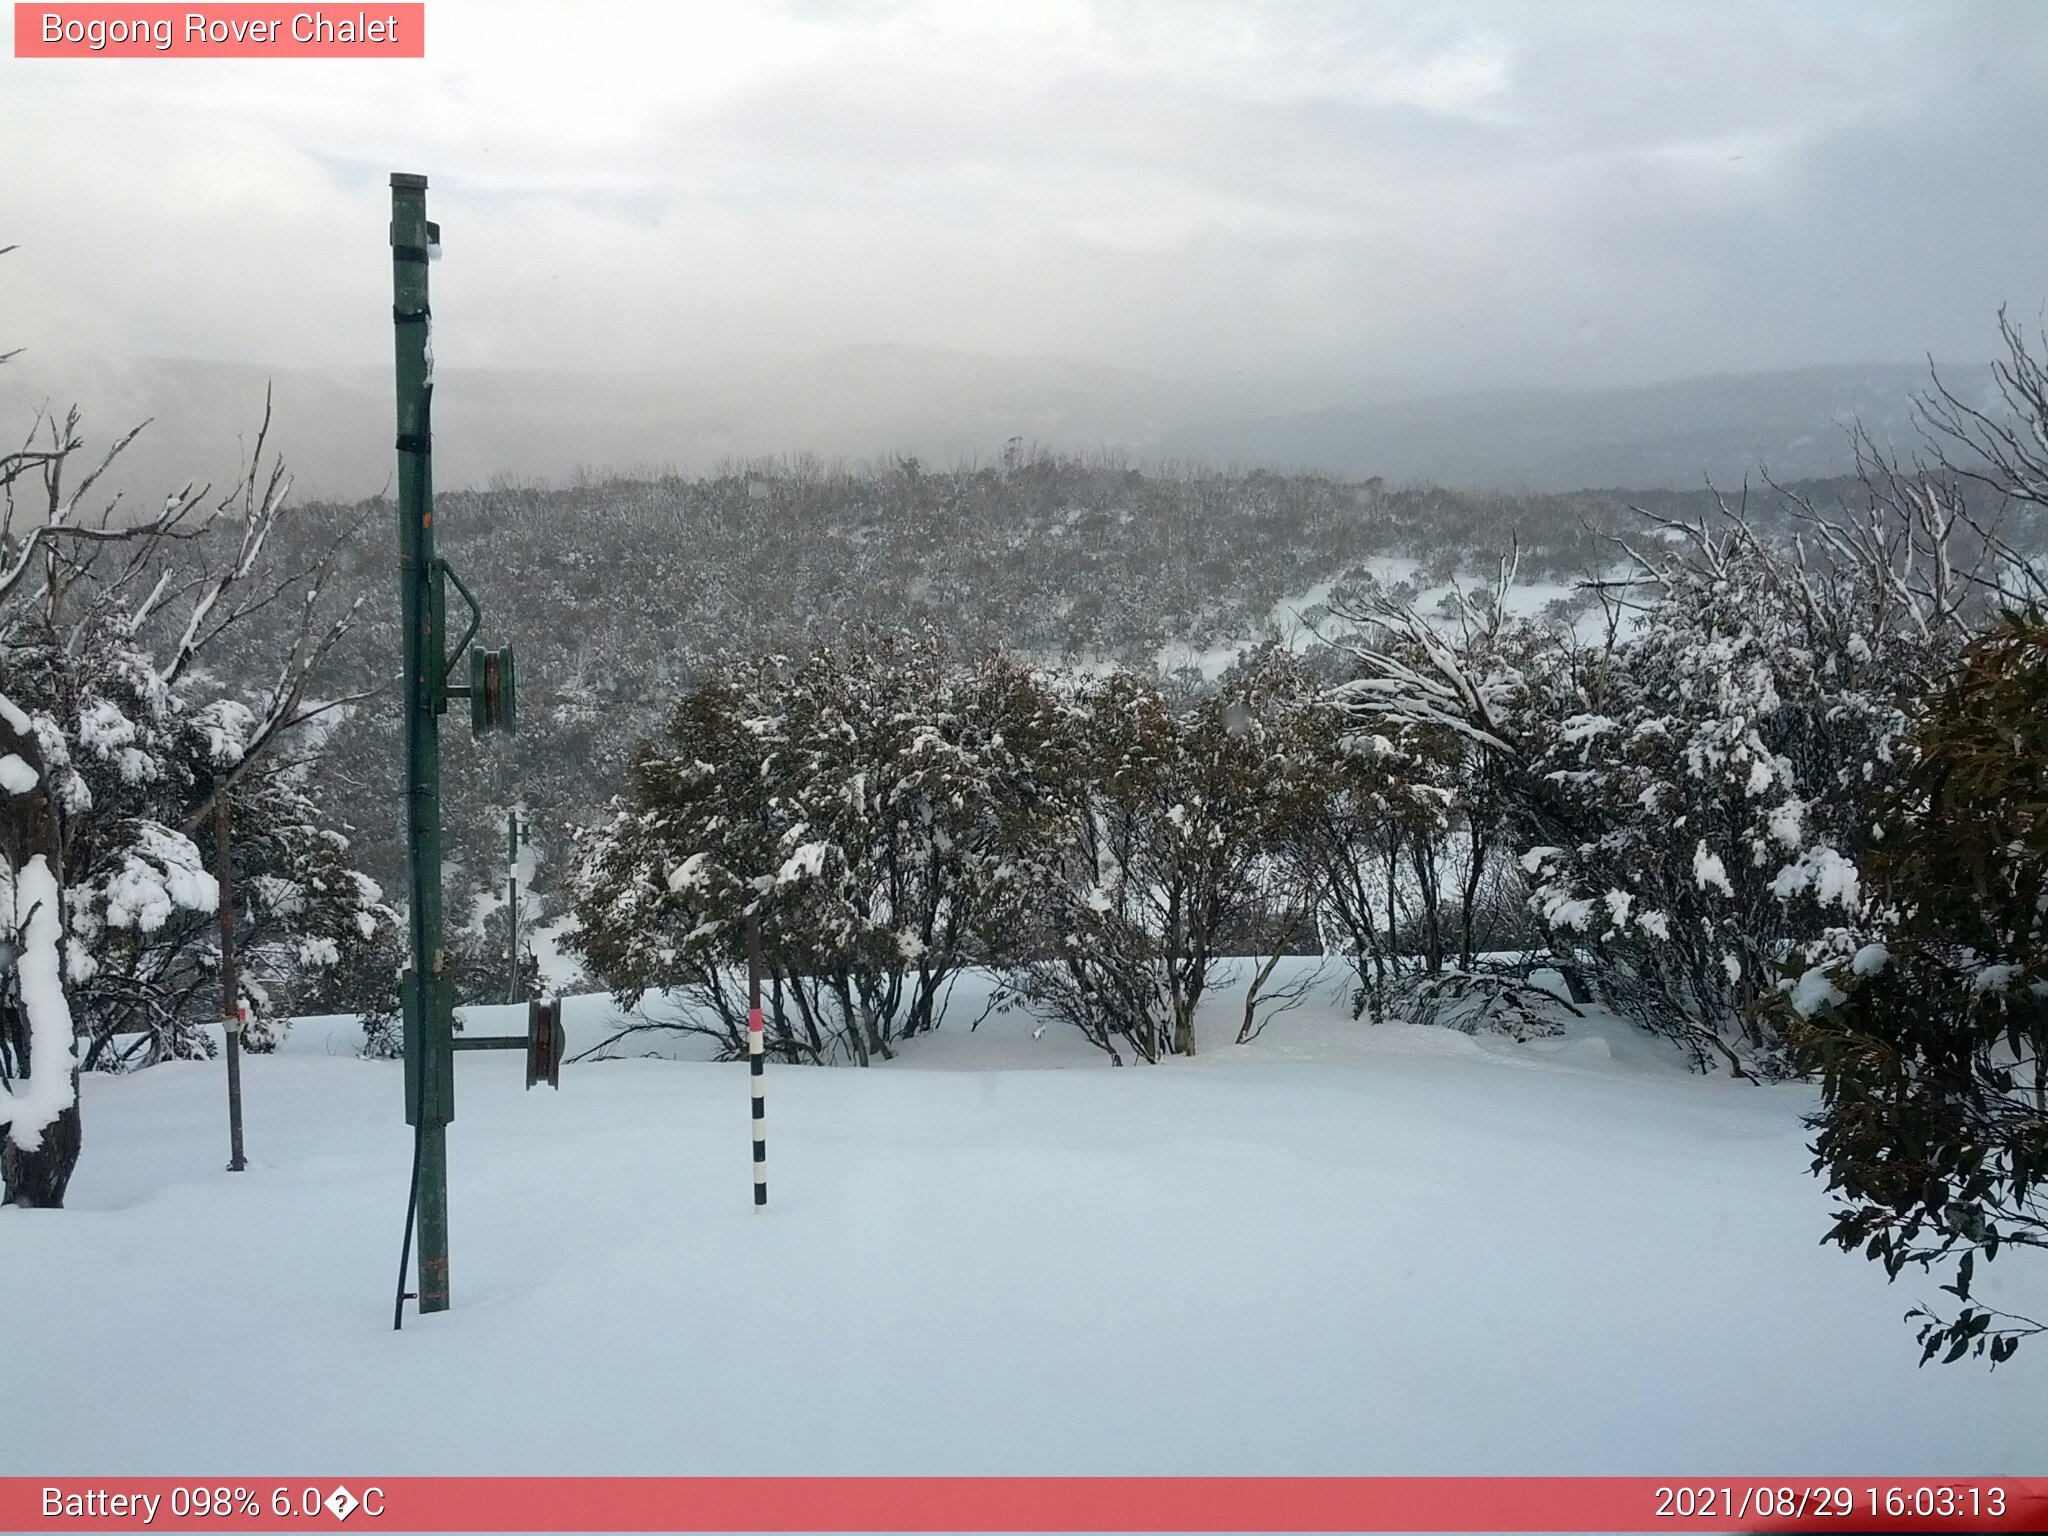 Bogong Web Cam 4:03pm Sunday 29th of August 2021